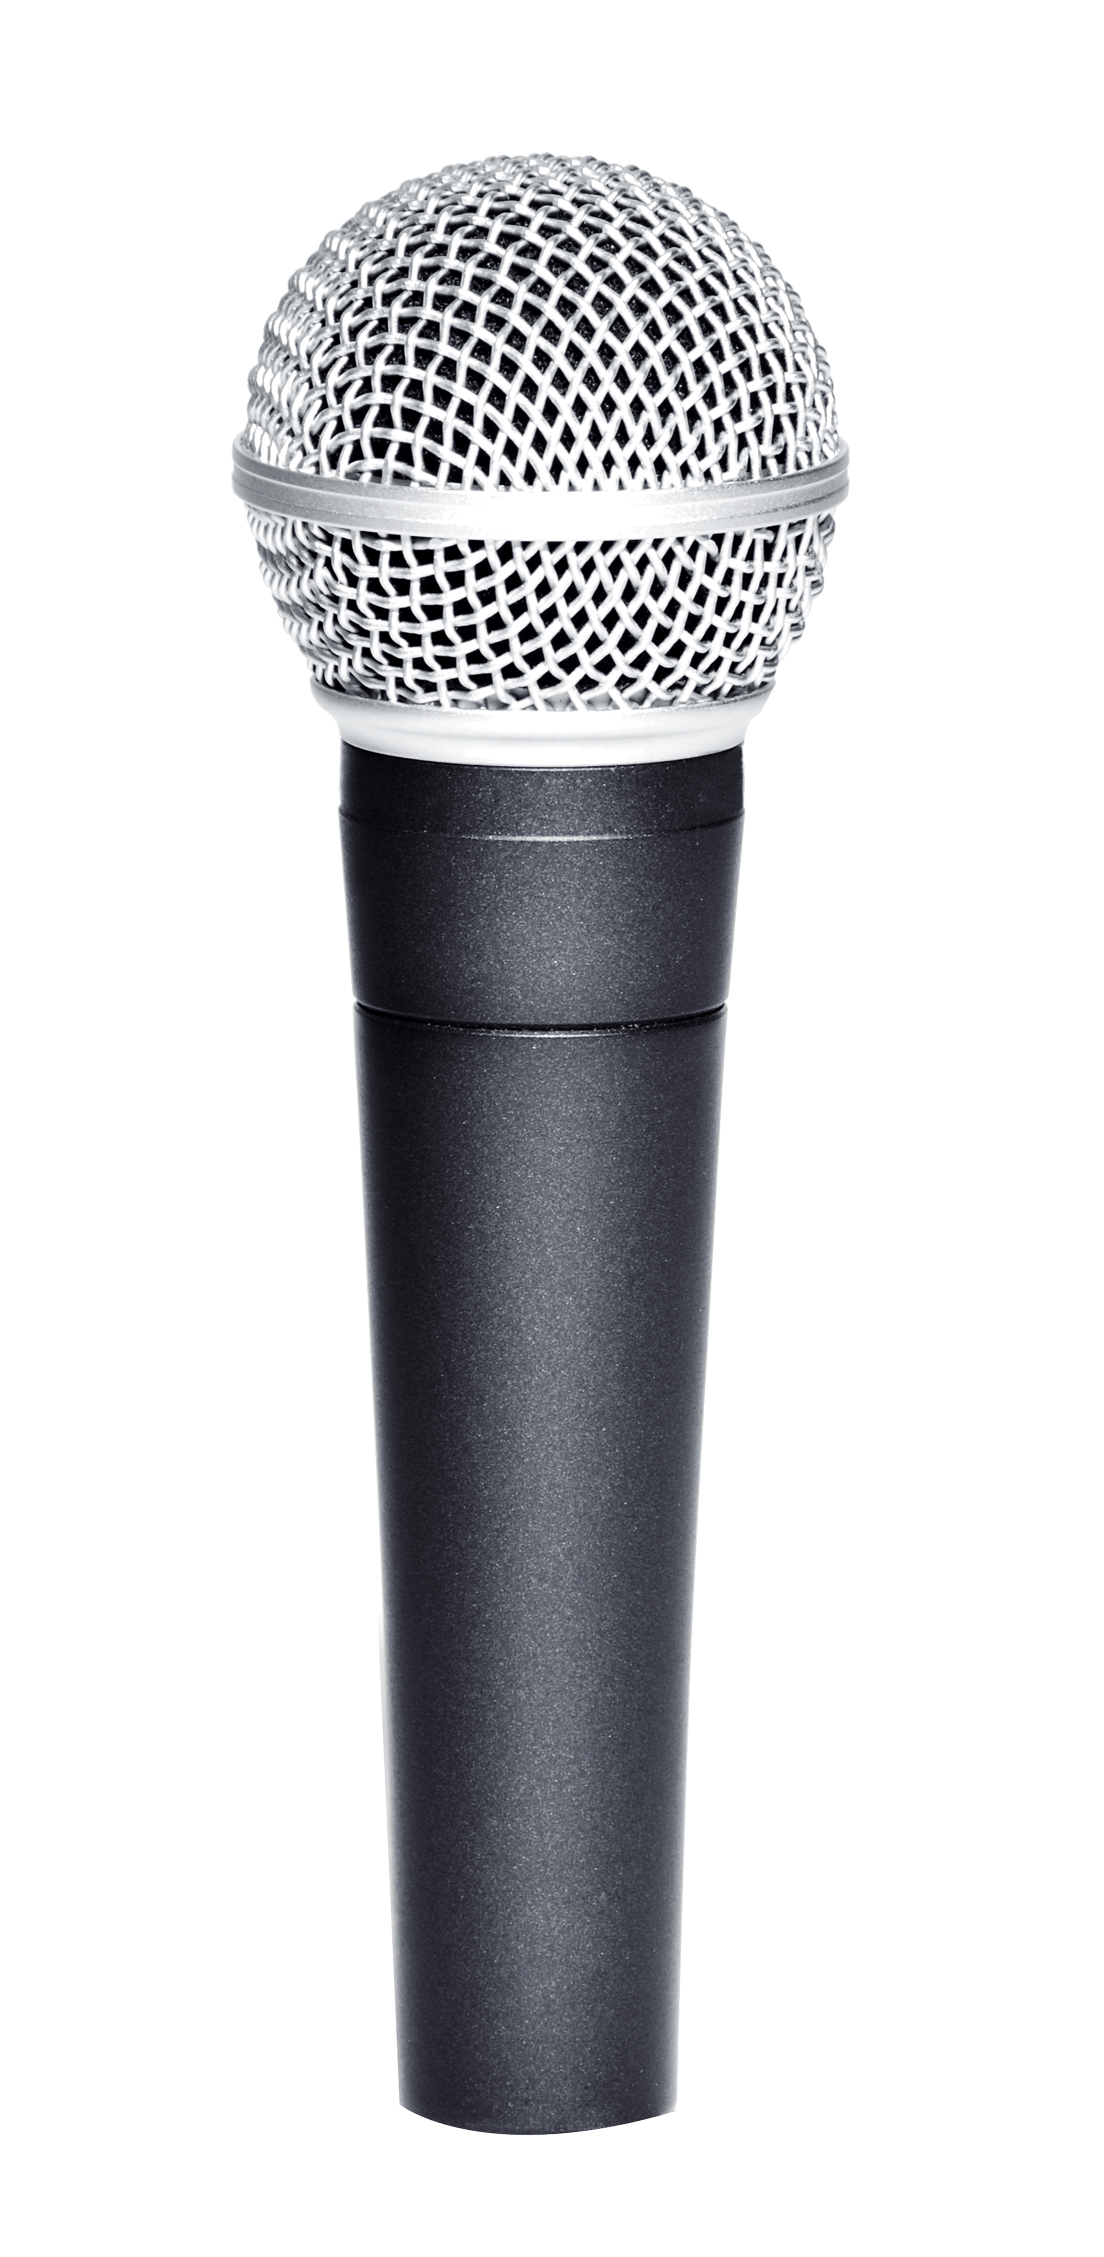 Microphone Png Transparent Image - Microphone, Transparent background PNG HD thumbnail